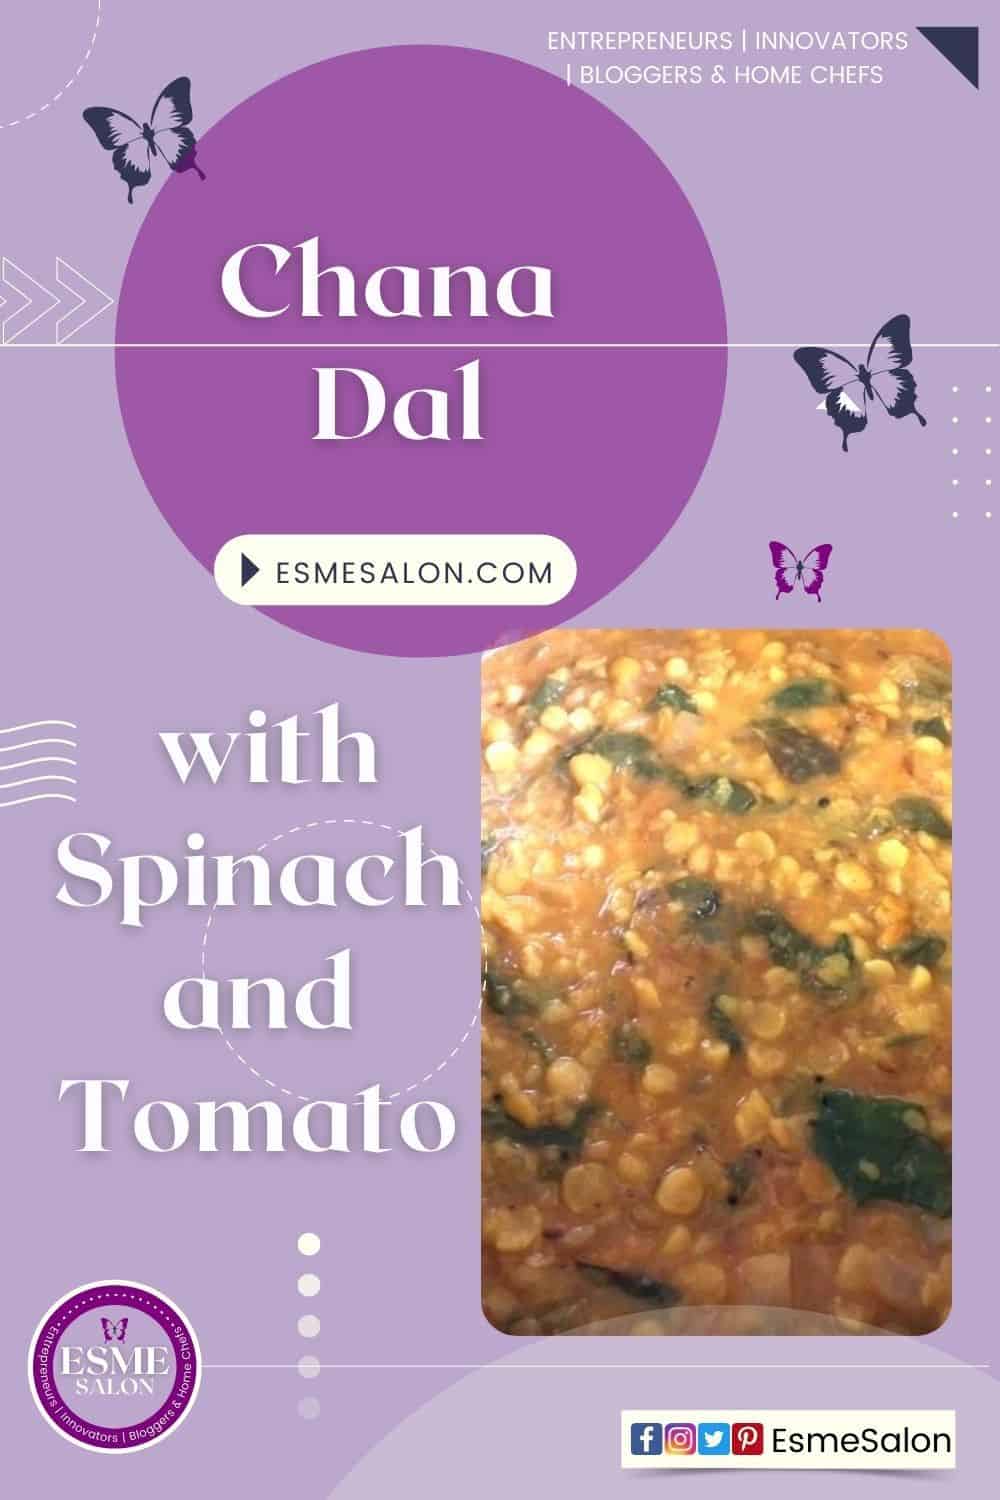 Chana Dal with Spinach and Tomato